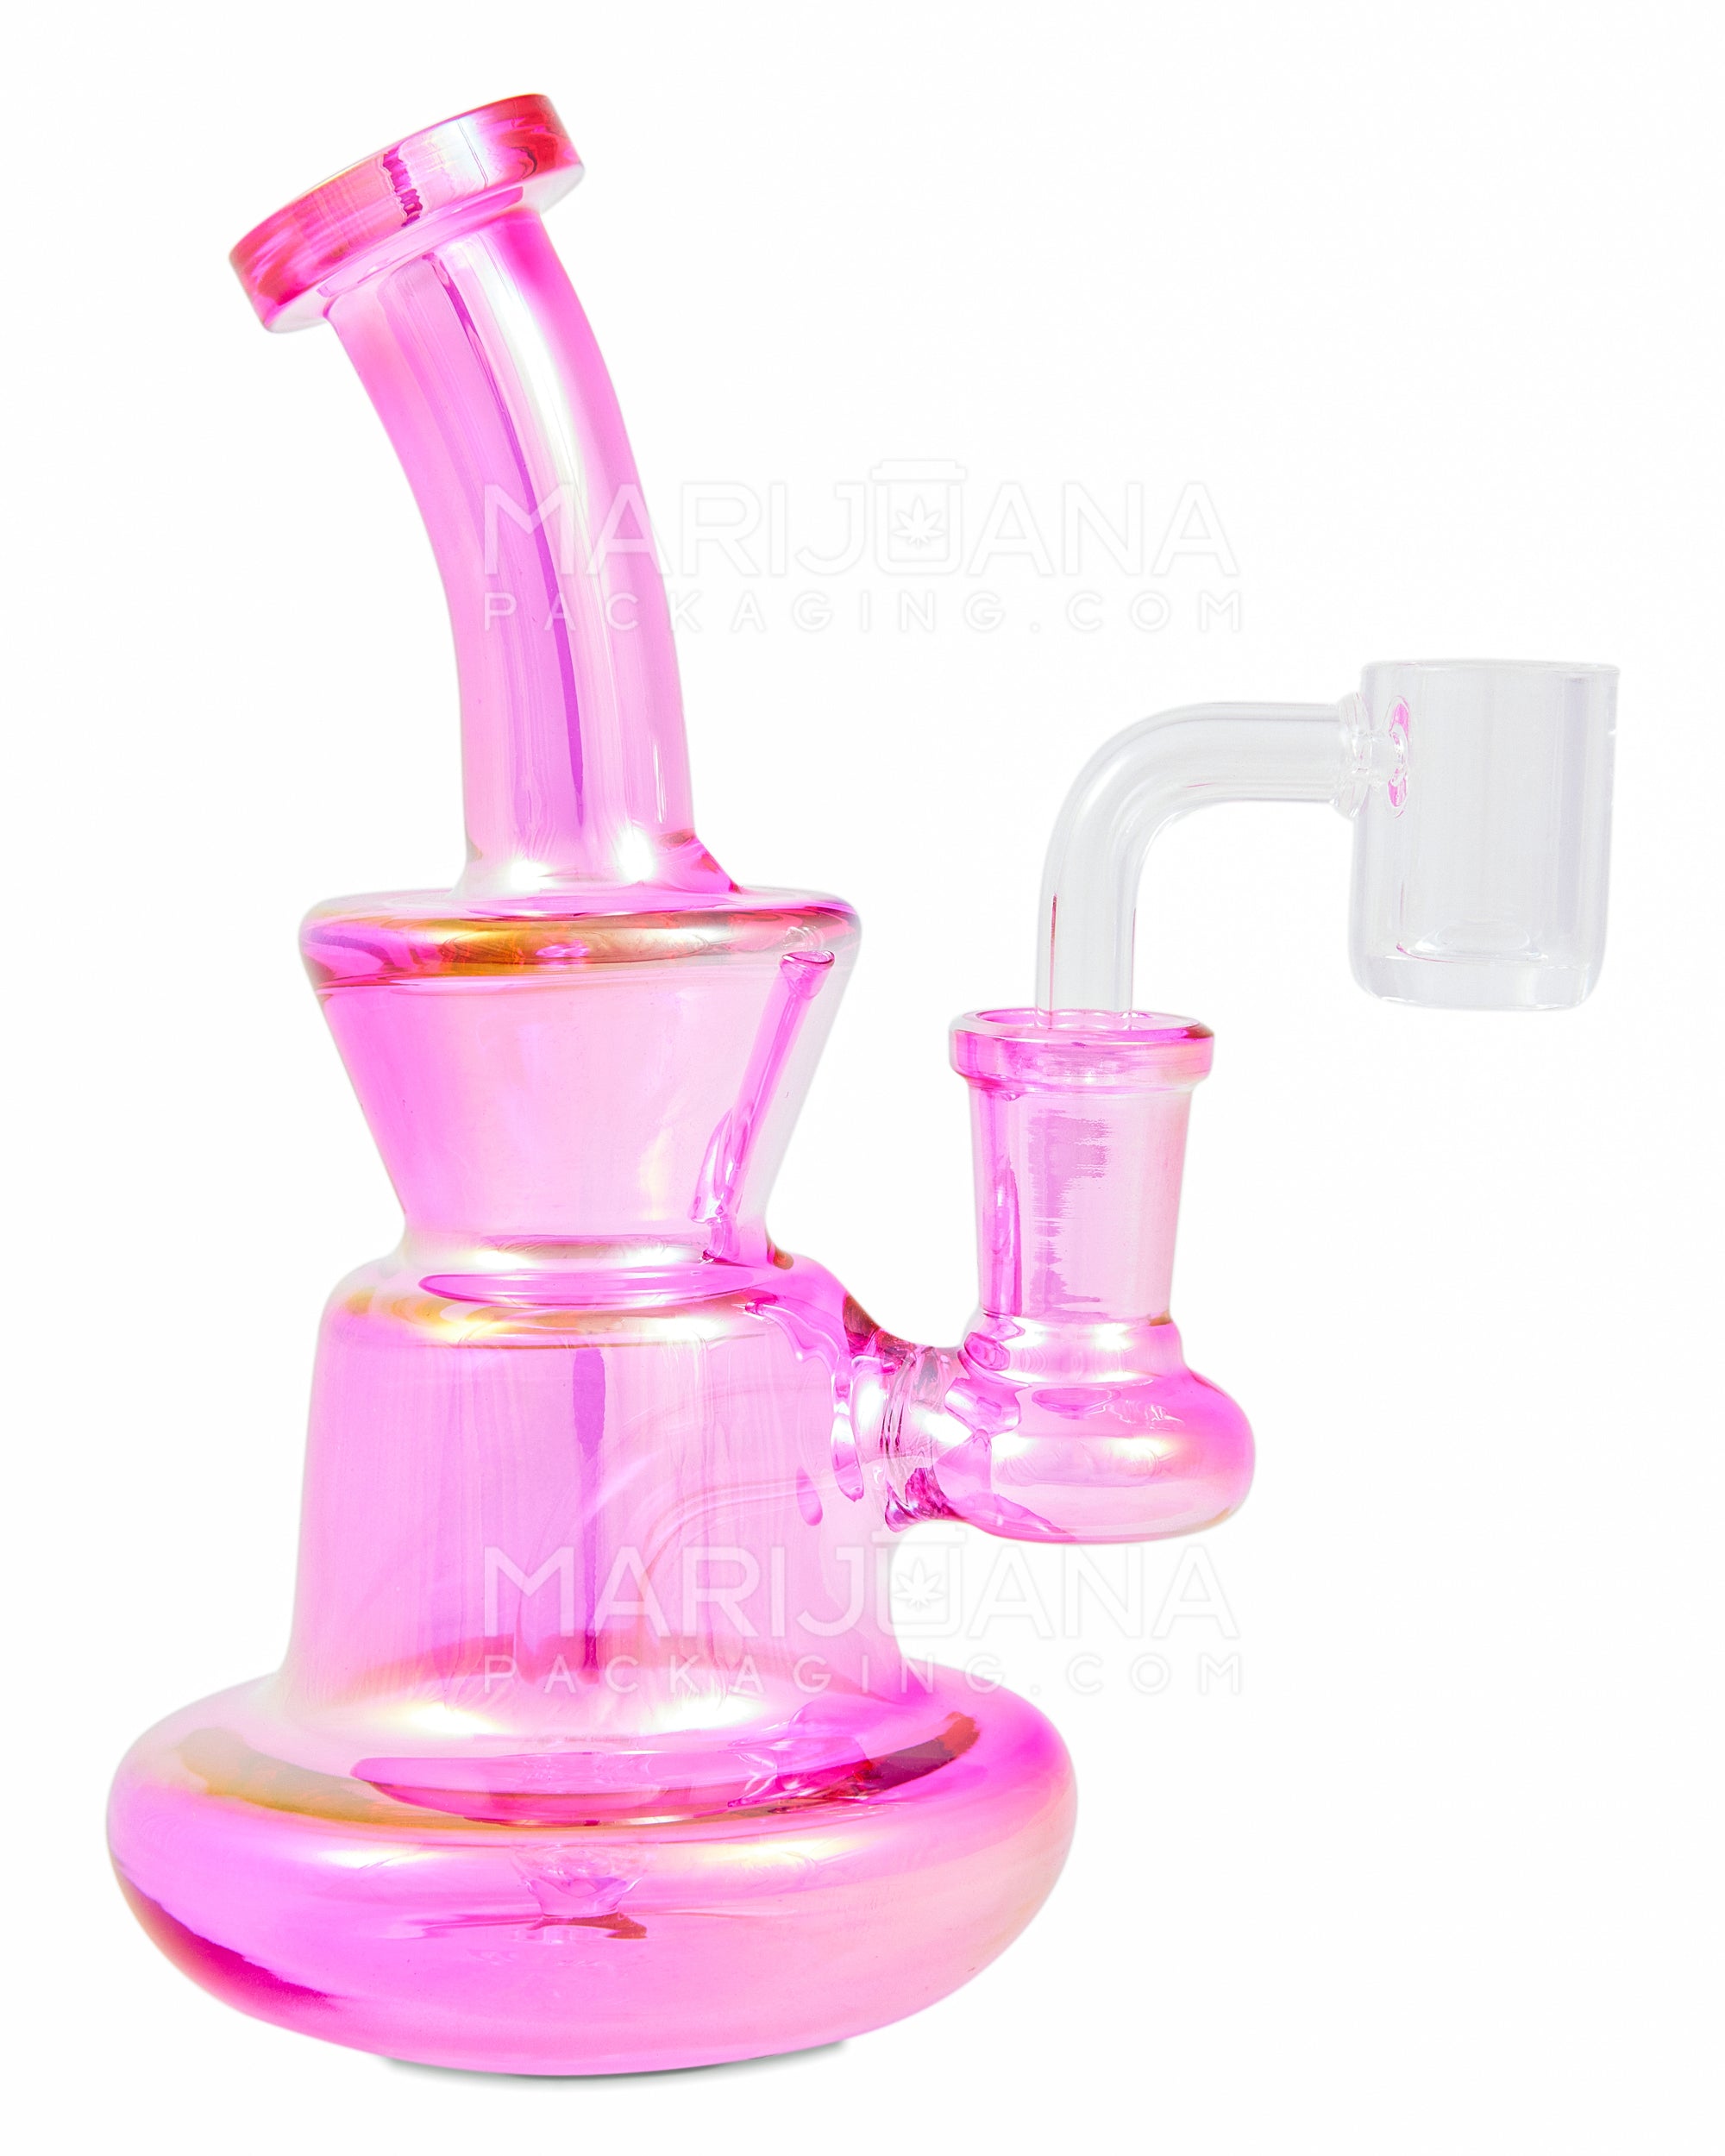 Bent Neck Iridescent Glass Dab Rig w/ Wide Base | 6in Tall - 14mm Banger - Pink - 1